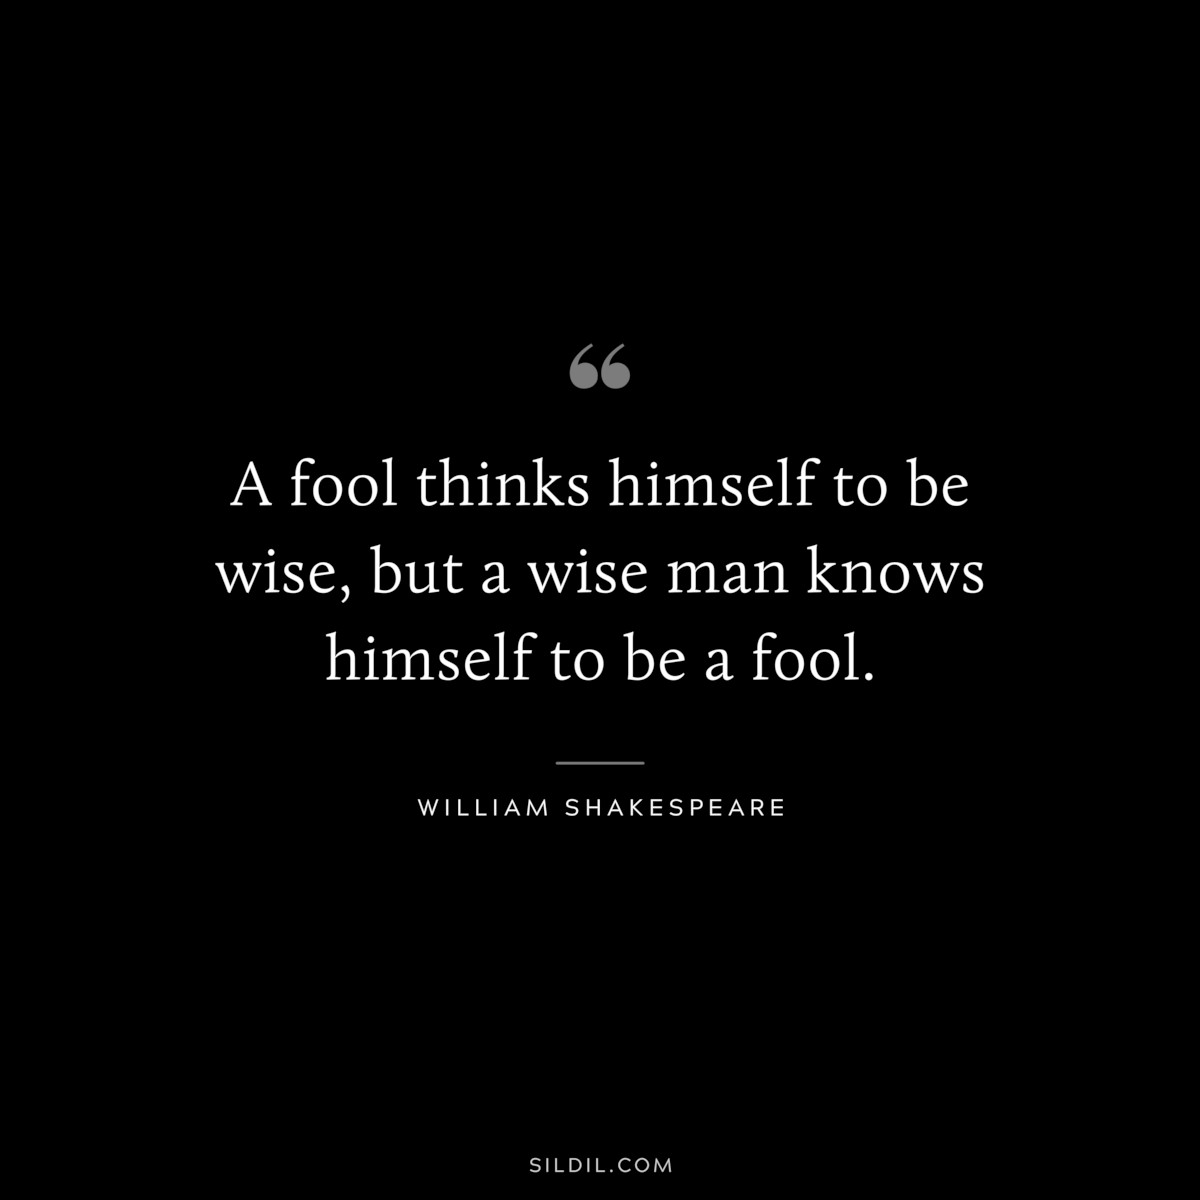 A fool thinks himself to be wise, but a wise man knows himself to be a fool. ― William Shakespeare